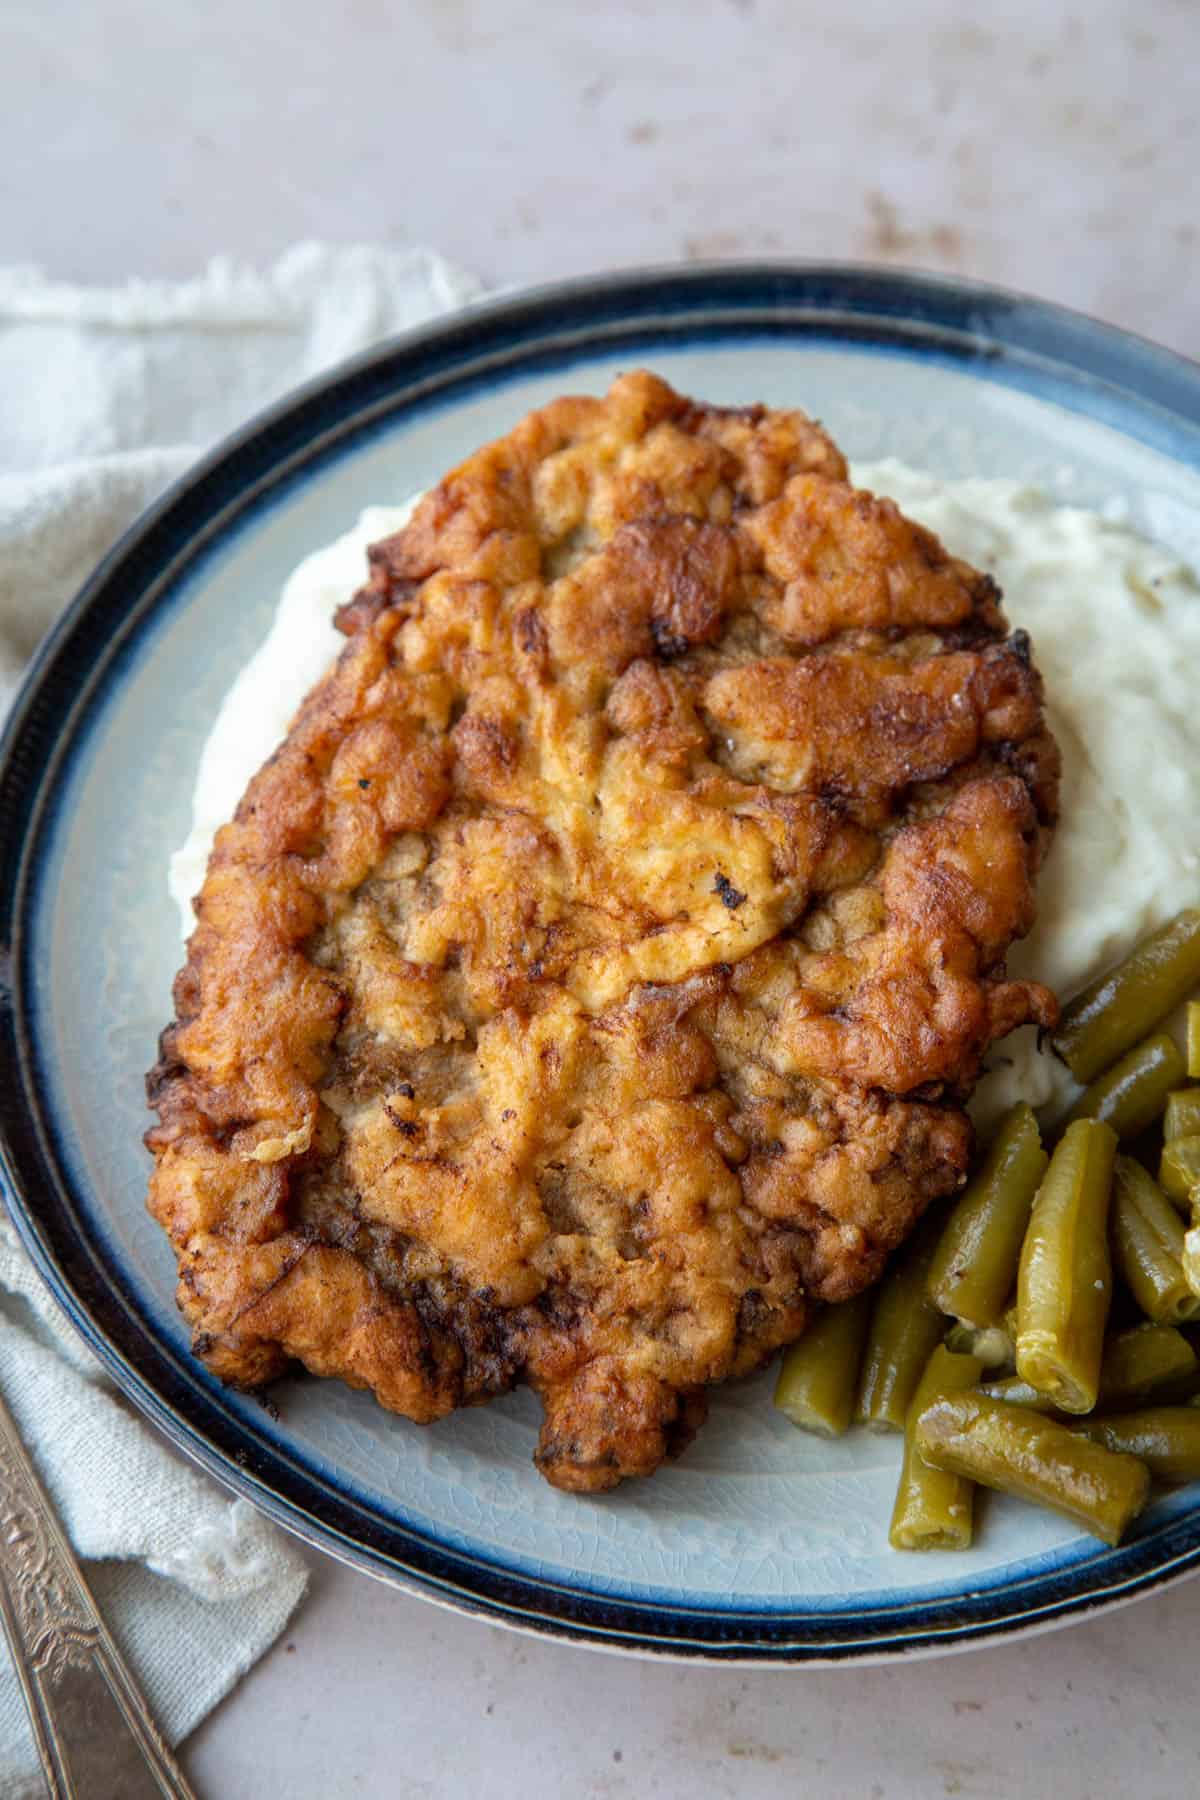 old fashioned chicken fried steak on a plate with mashed potatoes and green beans.